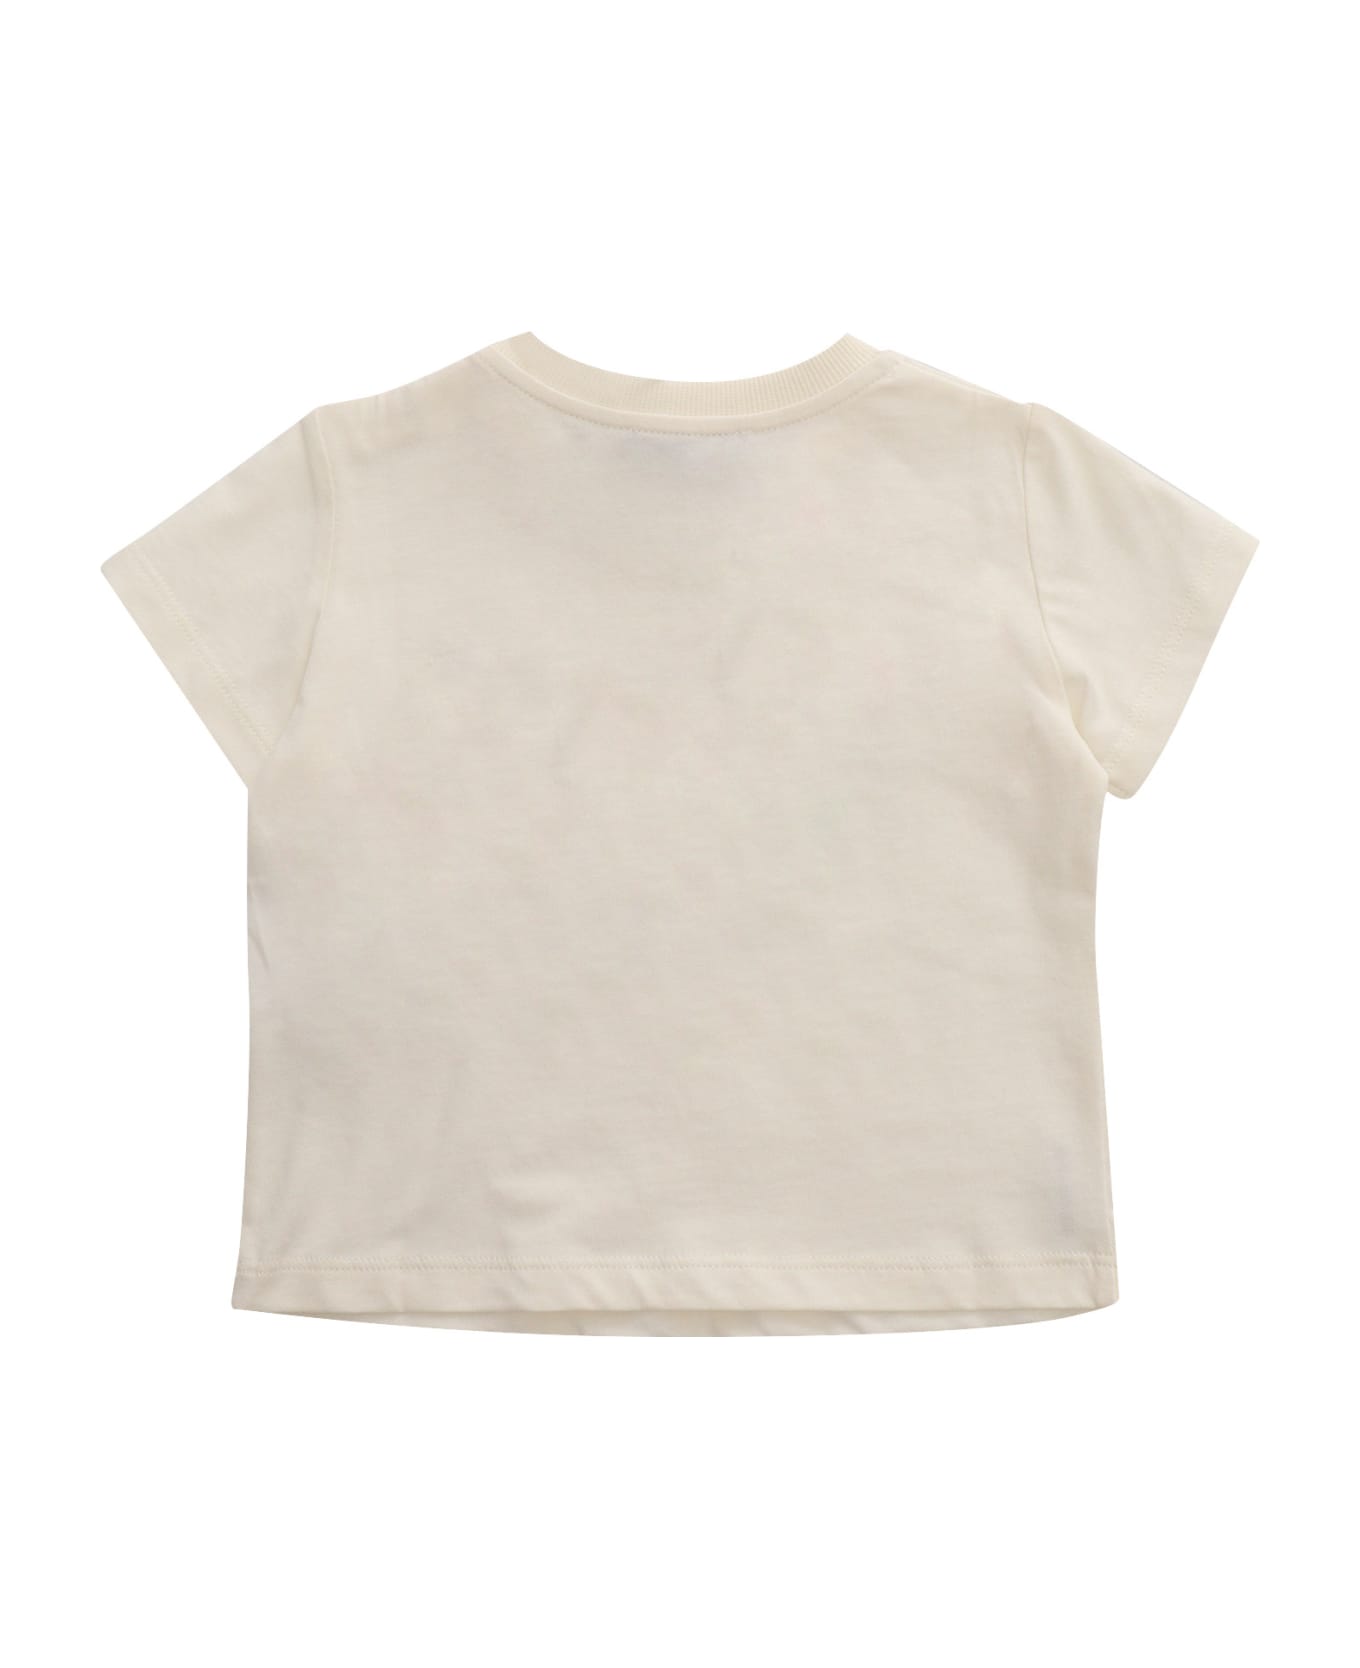 Moschino Cream Colored T-shirt With Pattern - PANNA